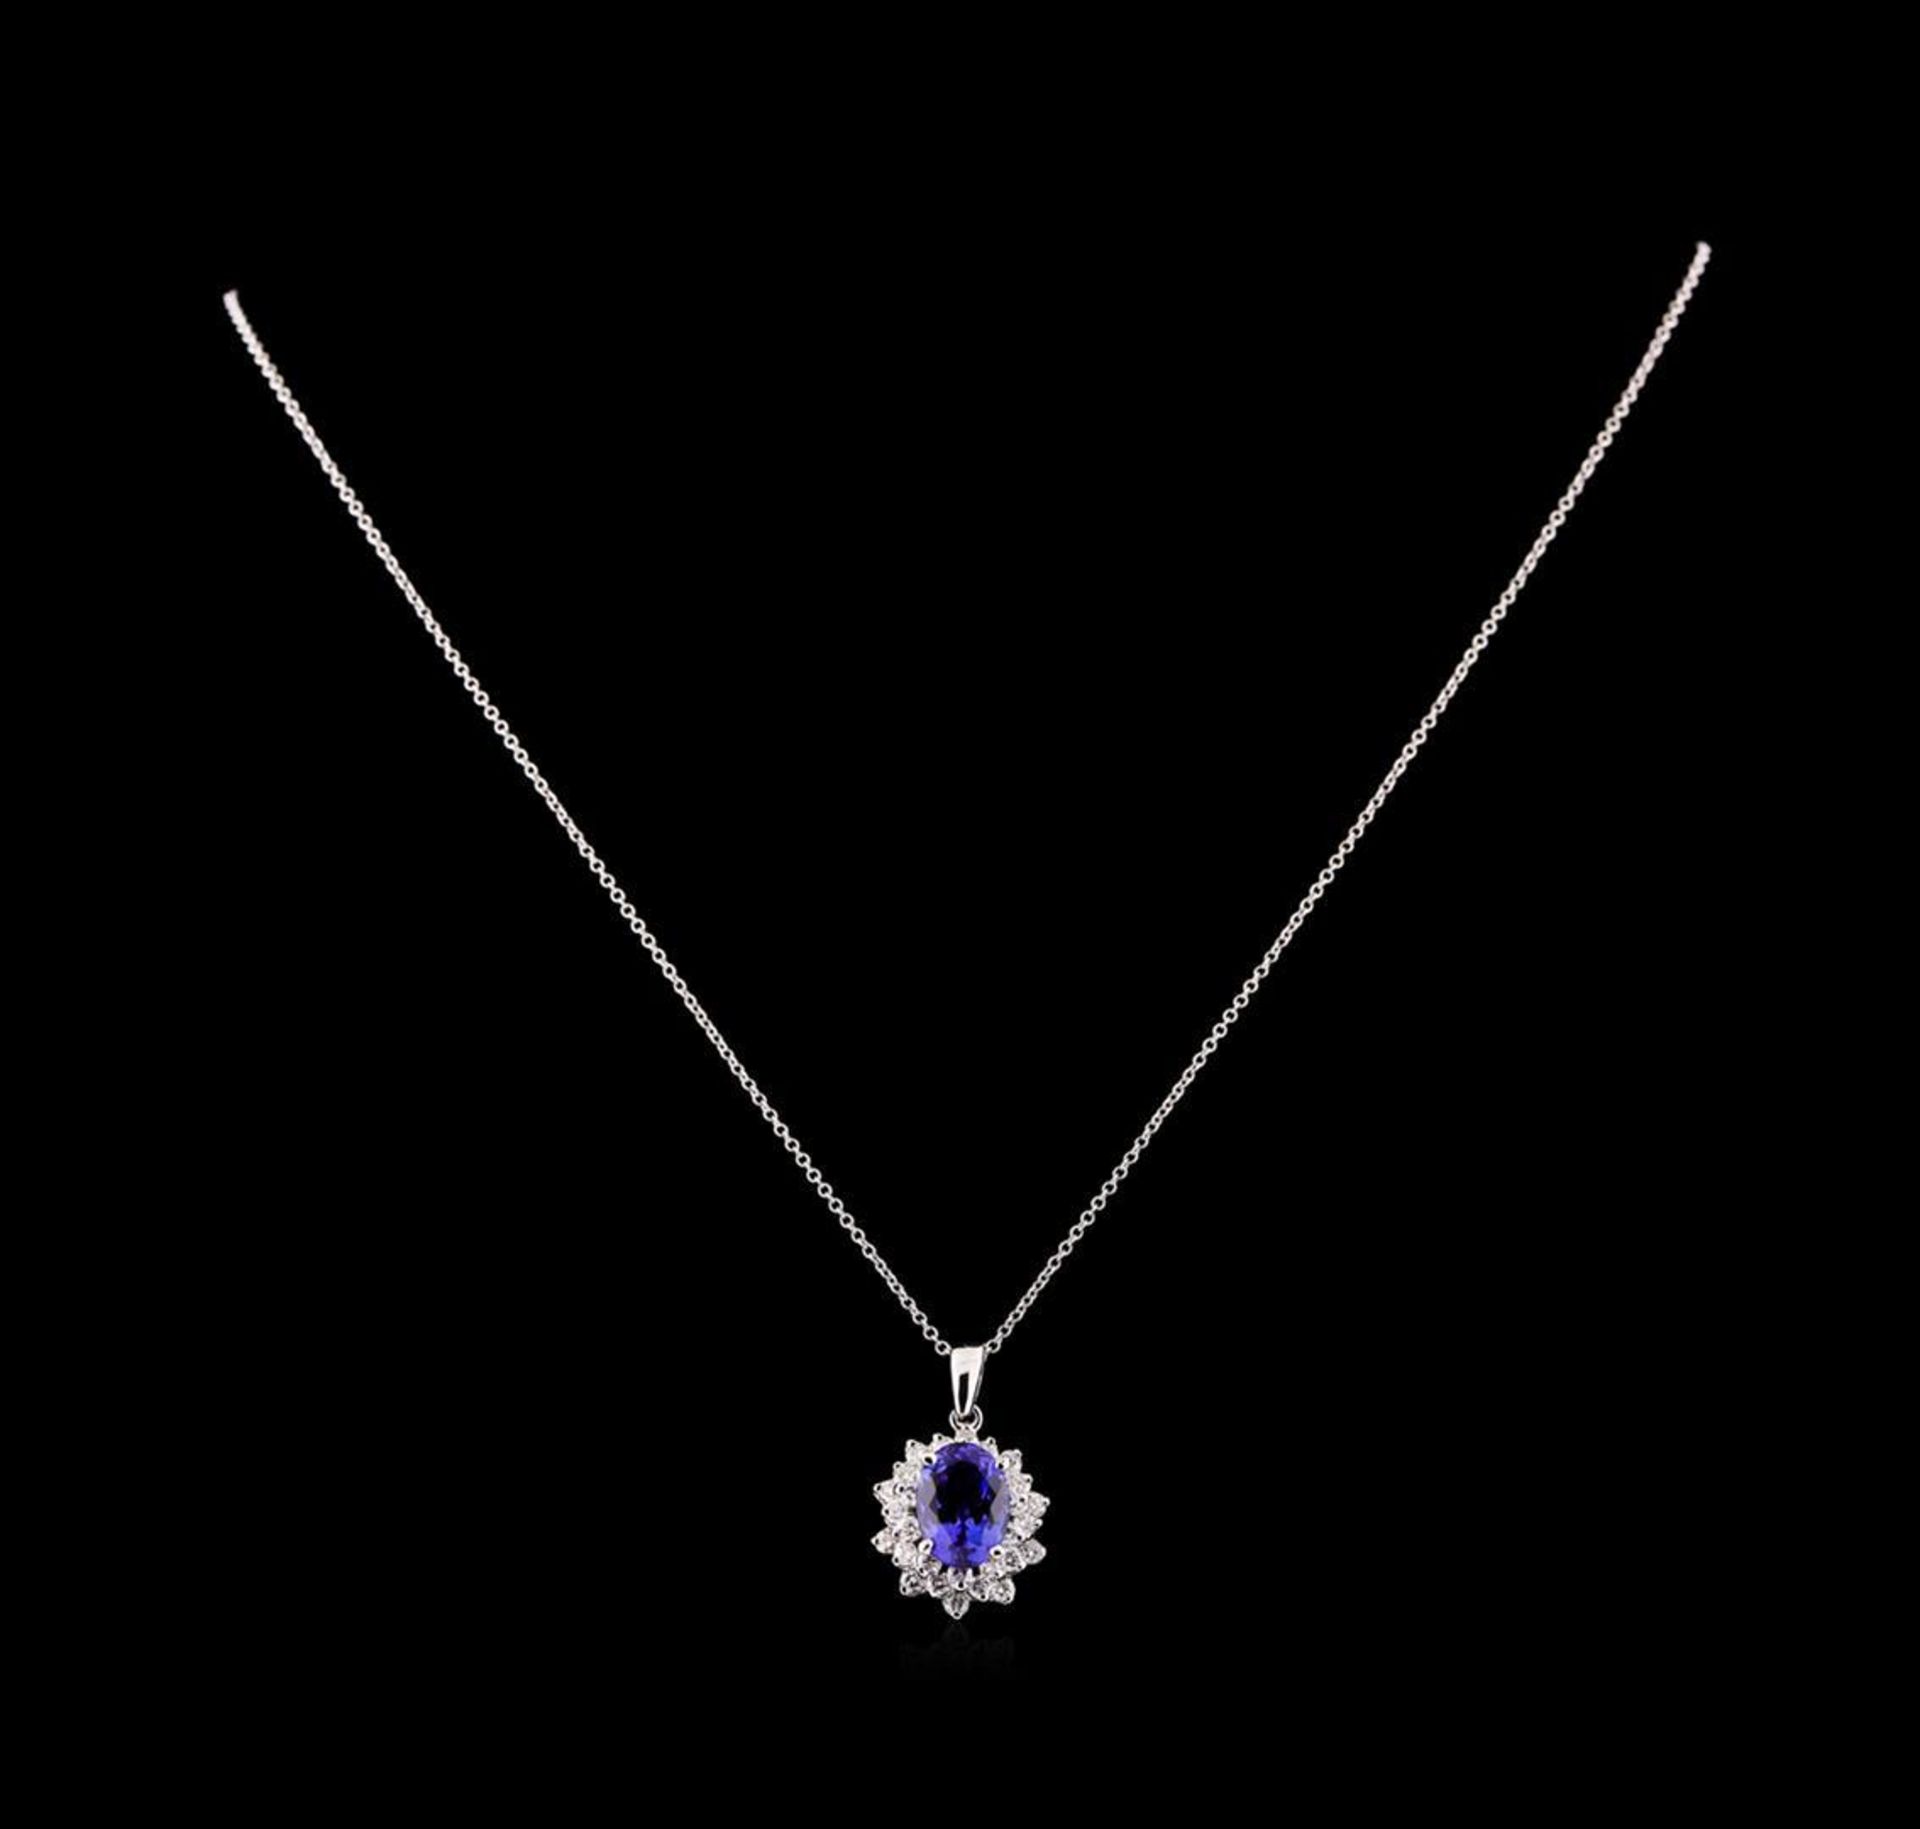 3.40 ctw Tanzanite and Diamond Pendant With Chain - 14KT White Gold - Image 2 of 3